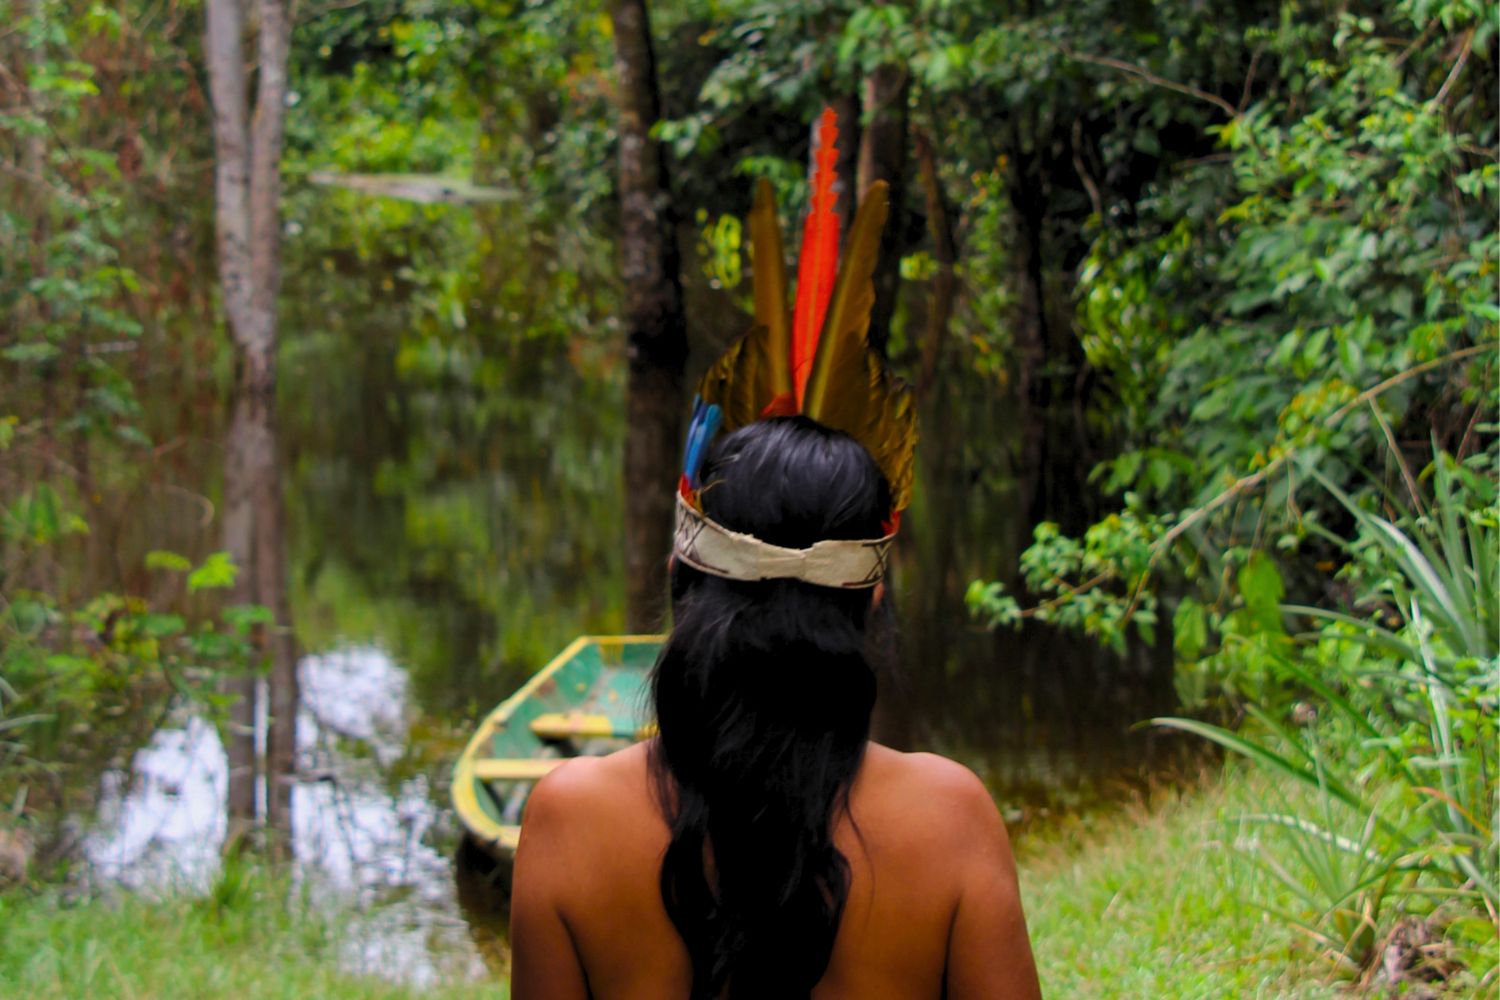 10. Their colorful plumes are used in Amazonian tribal headdresses for many reasons